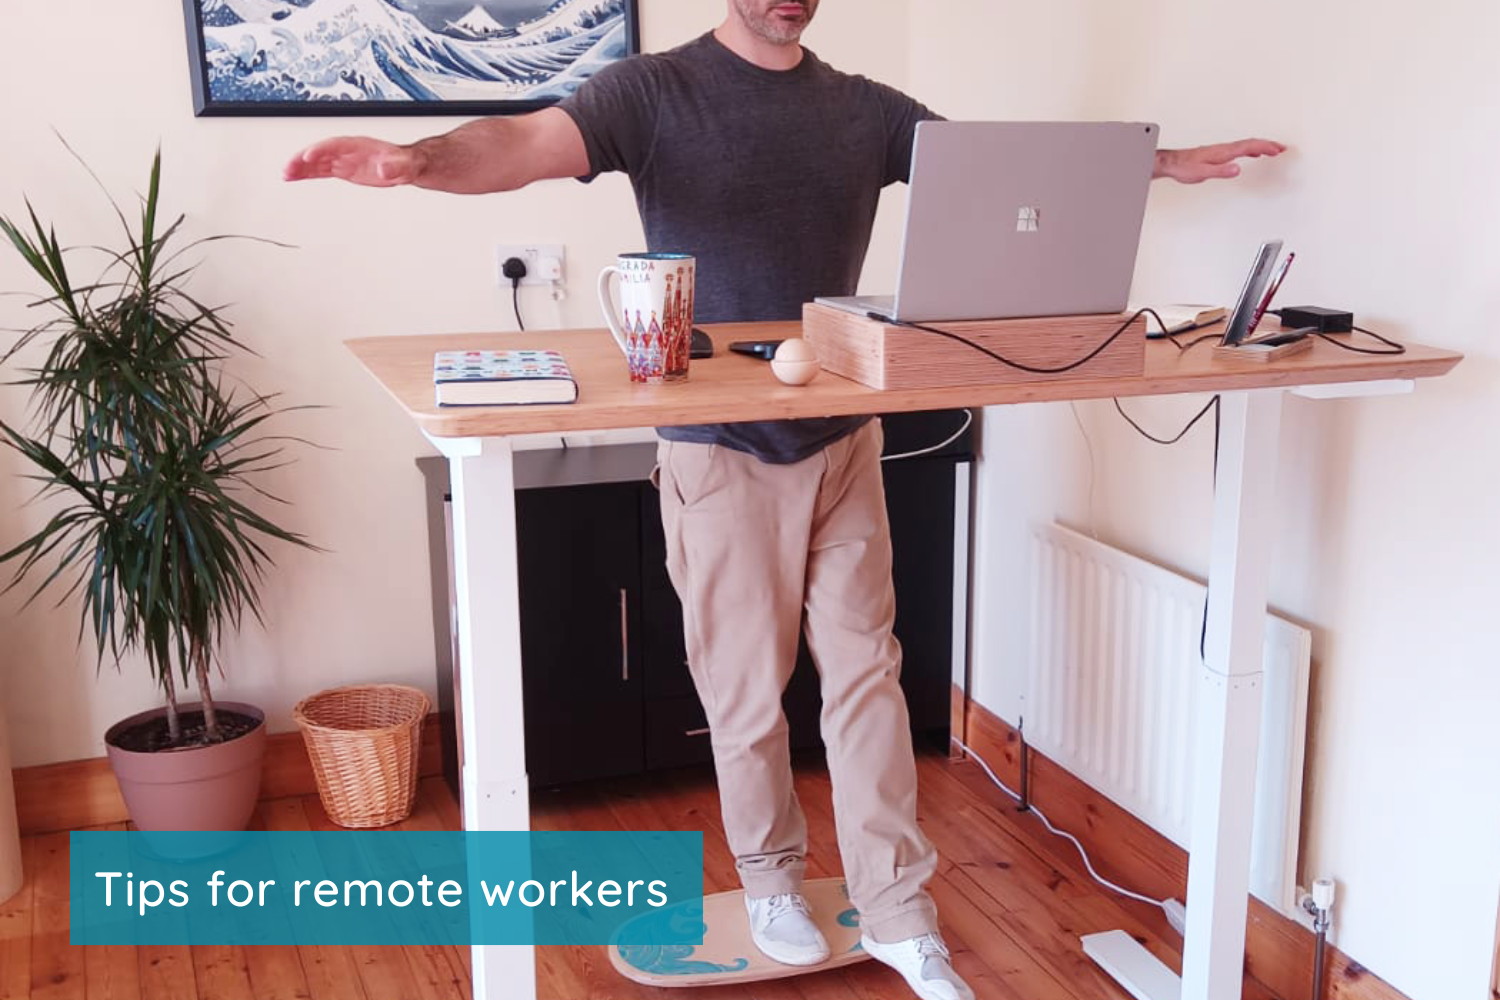 Stay active while working from home